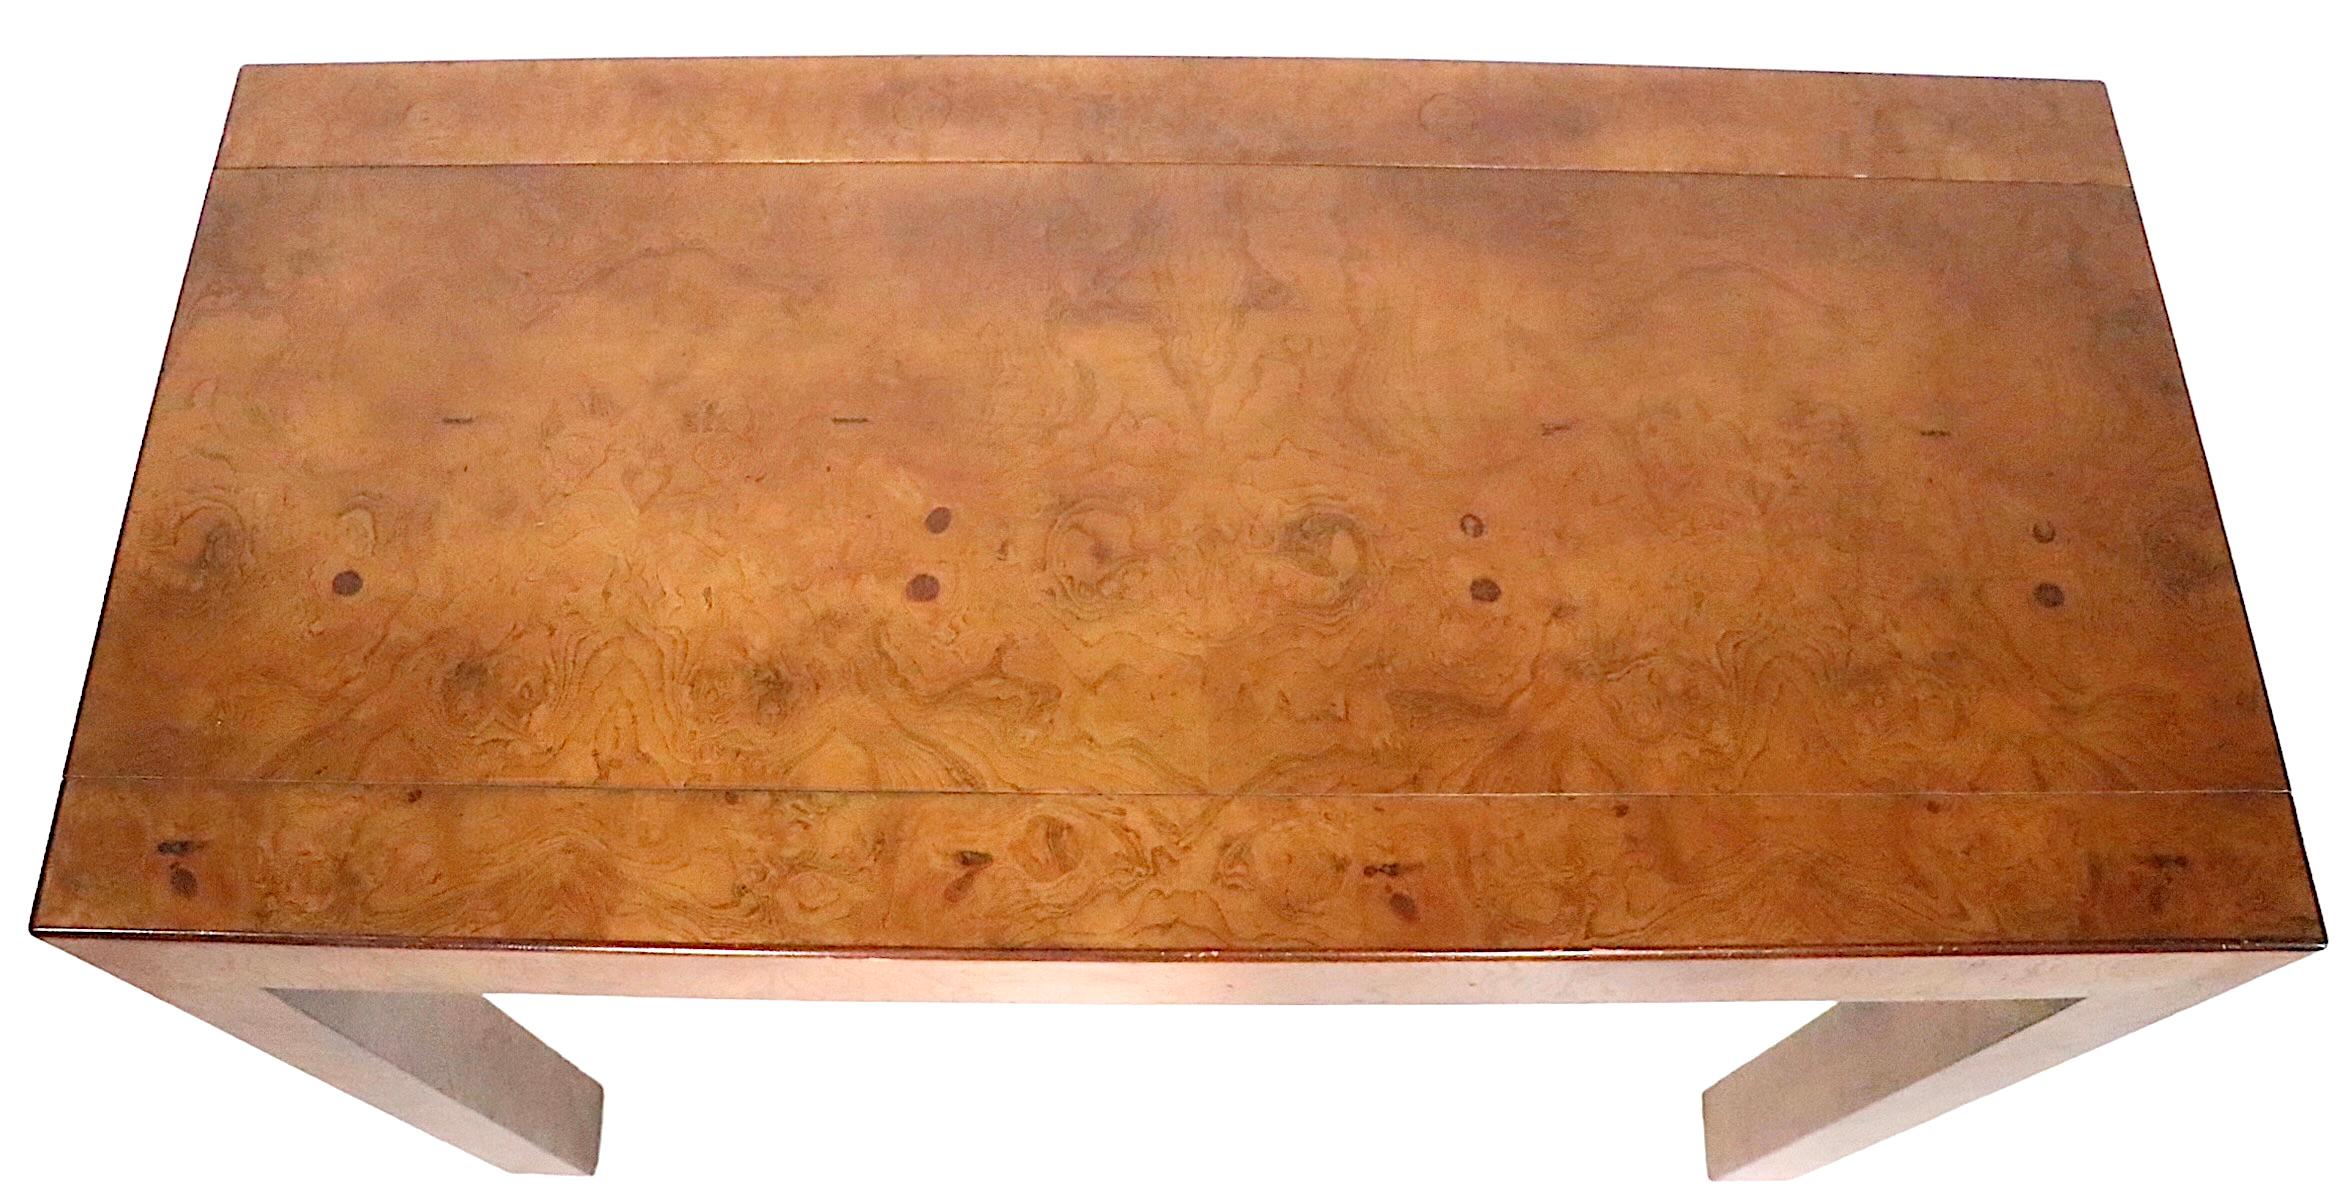 Chic burl Parsons style console table made by John Widdicomb, circa 1950-1960s. The table originally had many leaves which enabled it to function as a dining table, they are no longer present. 
Muscular chunky proportions, coupled with a voguish